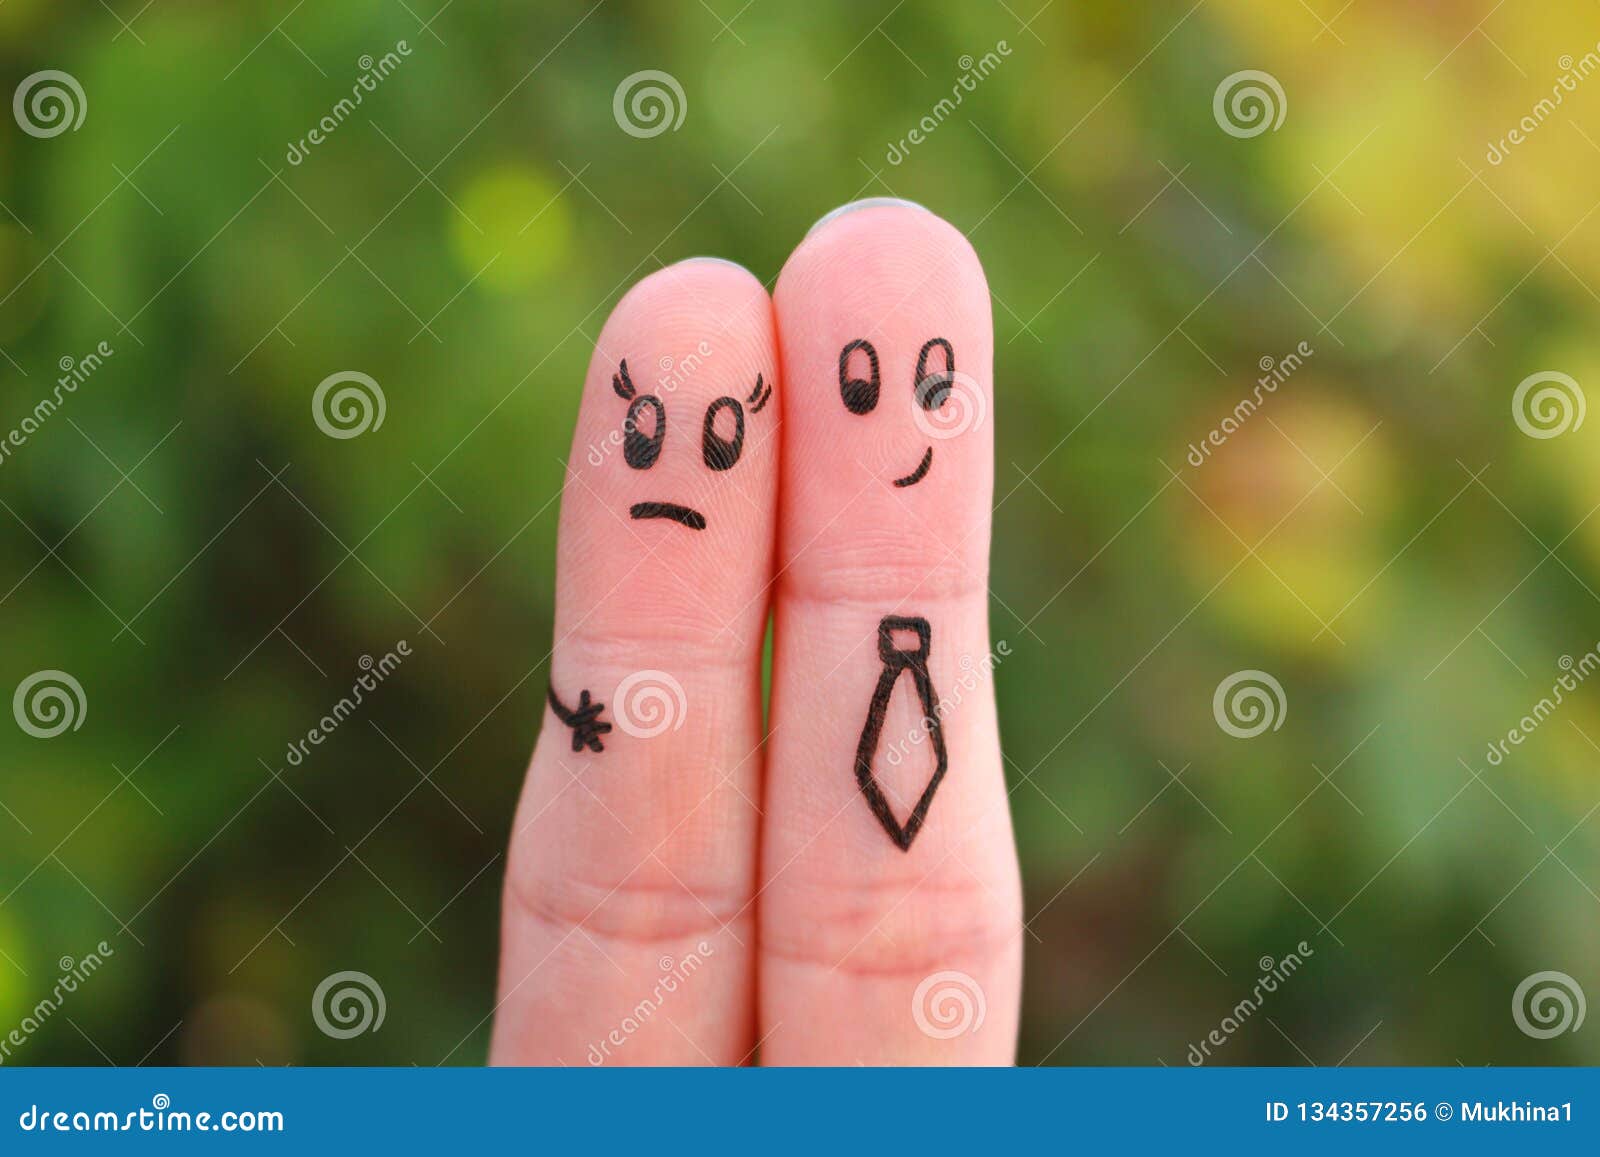 fingers art of couple. concept of man harassing woman